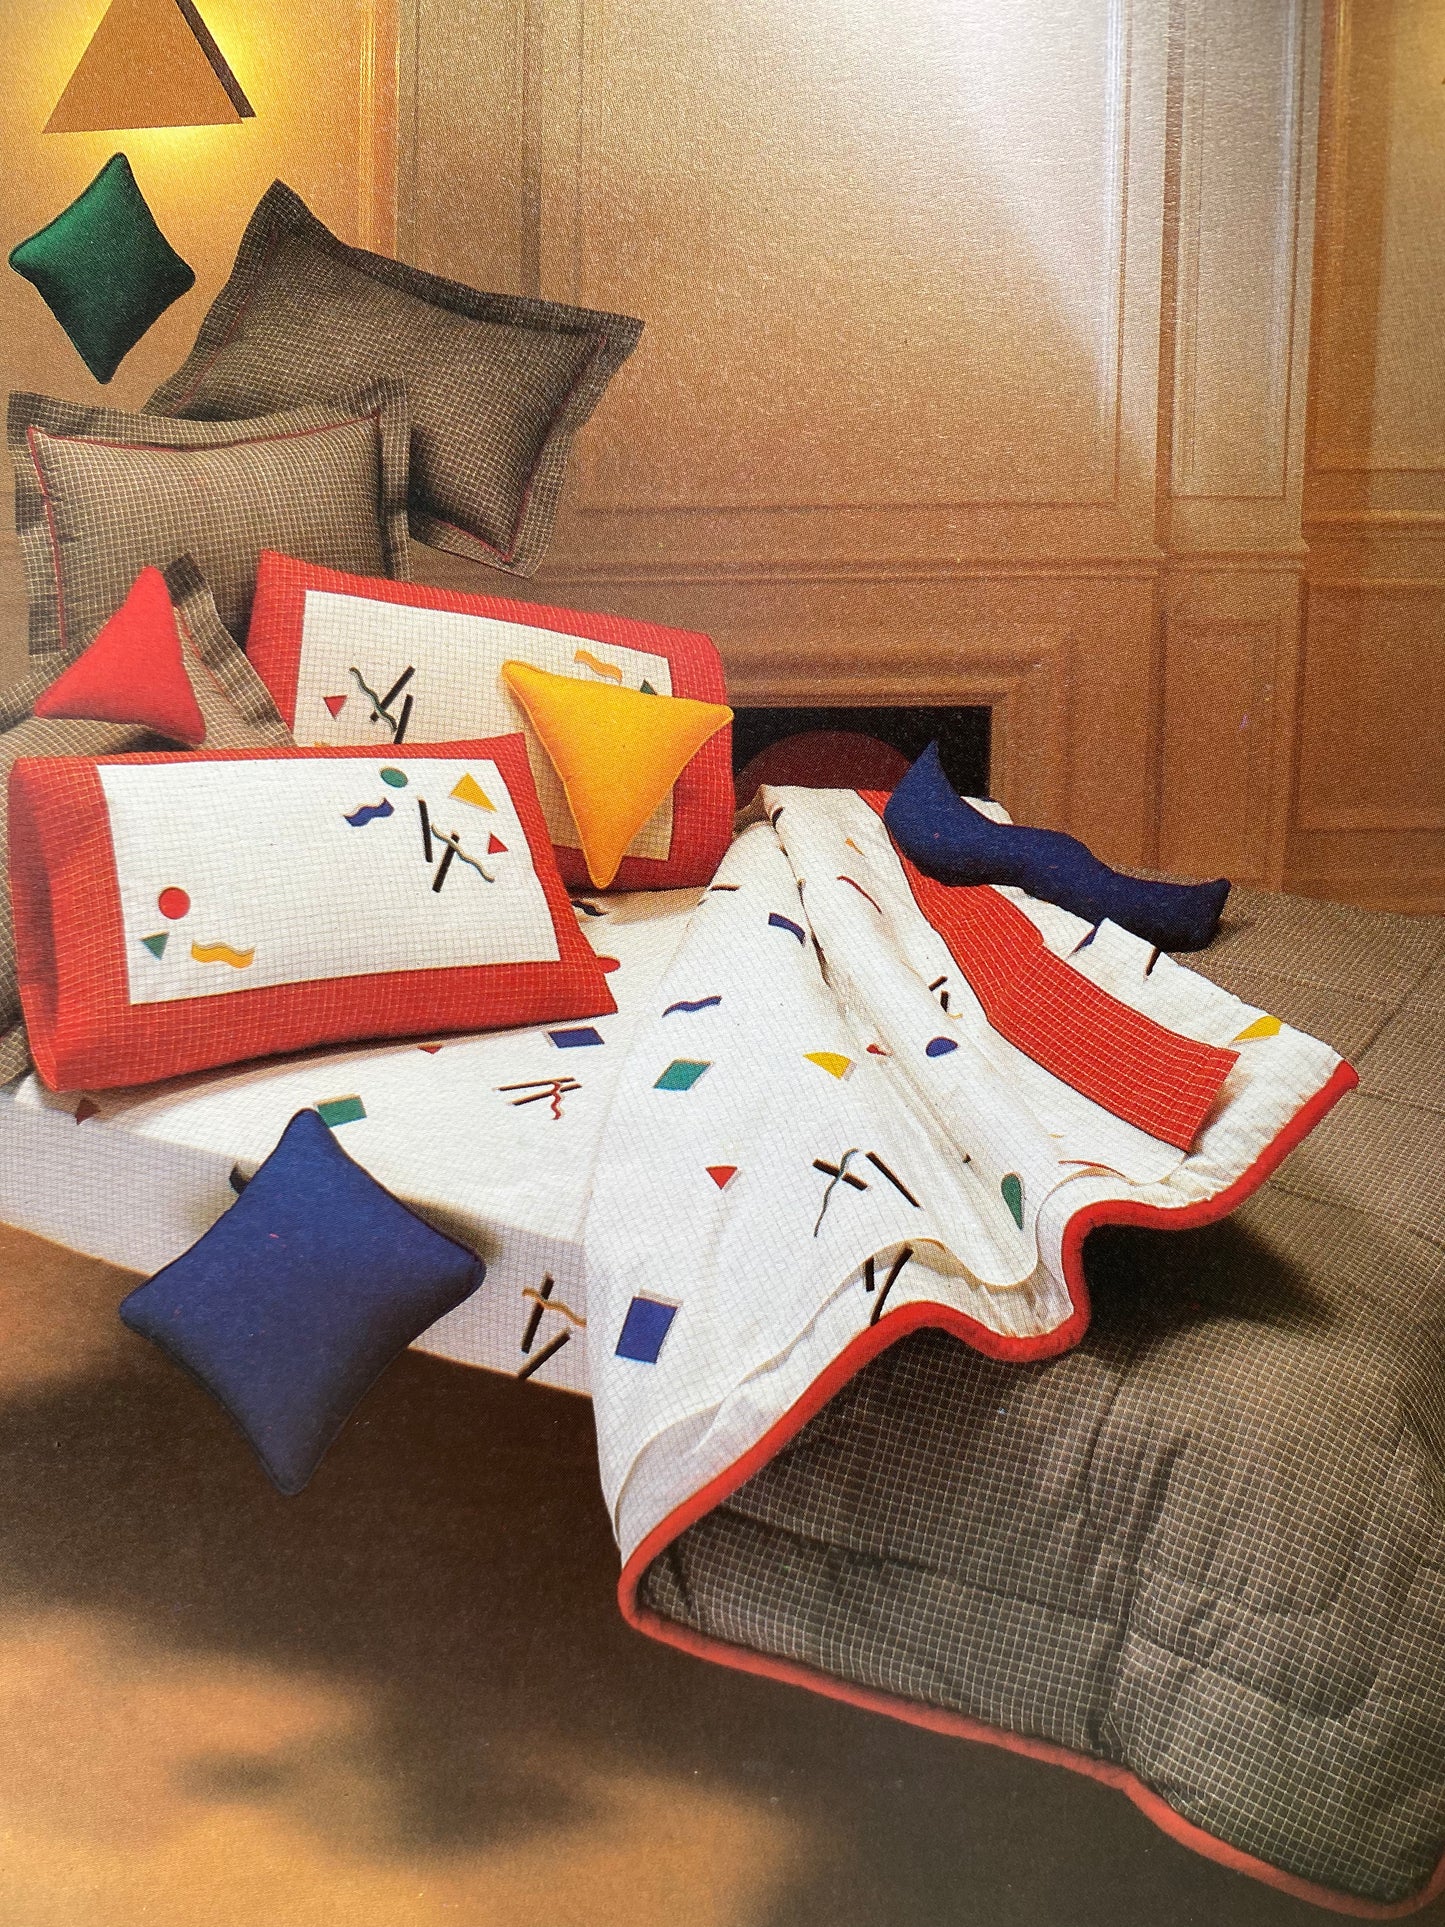 Richard Horn - Memphis: Objects, Furniture, and Patterns (1986)